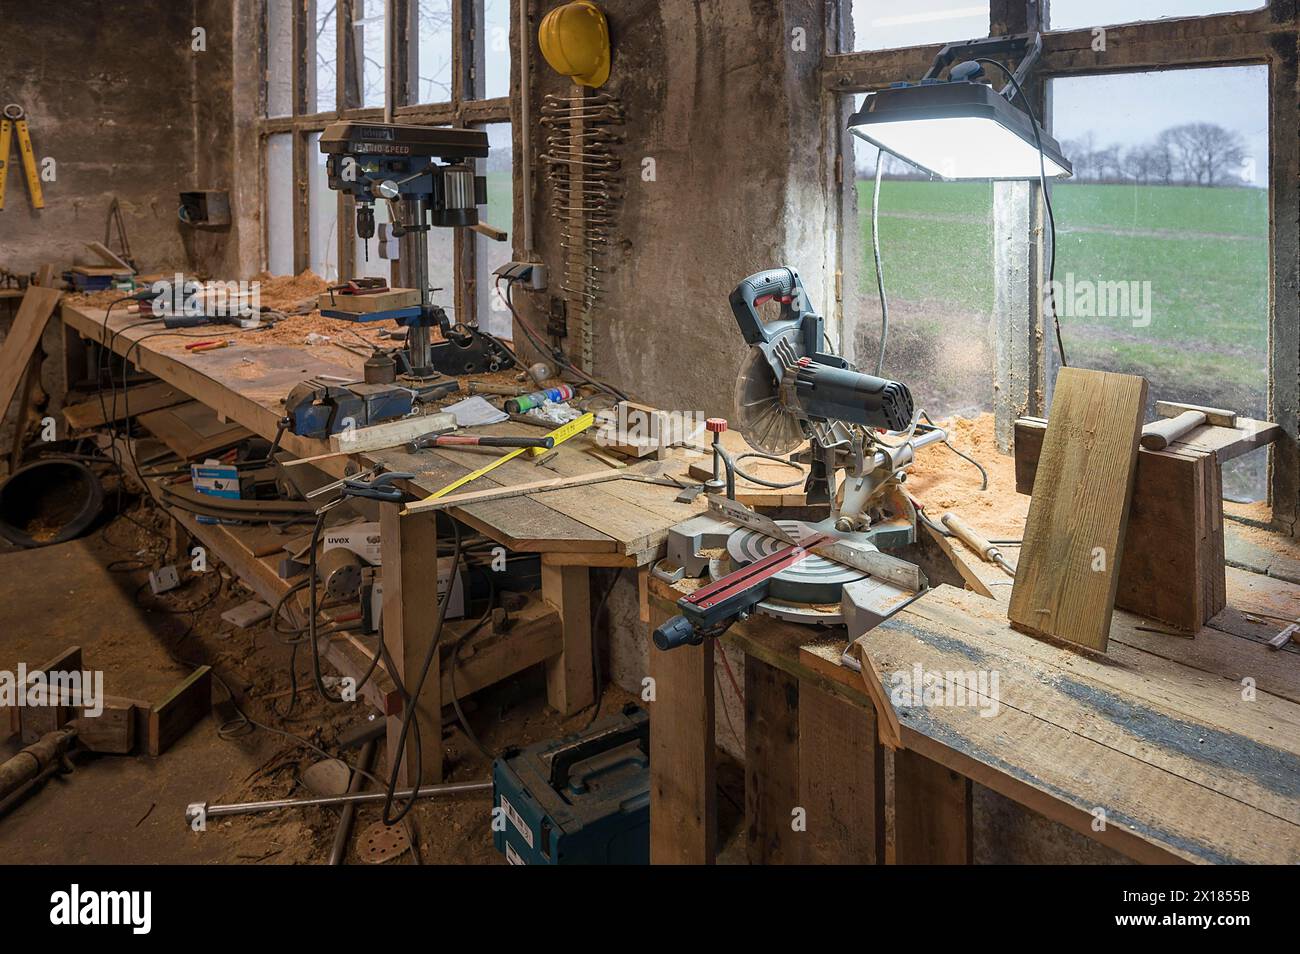 Workbench with drill stand and circular saw in a workshop, Mecklenburg-Vorpommern, Germany Stock Photo